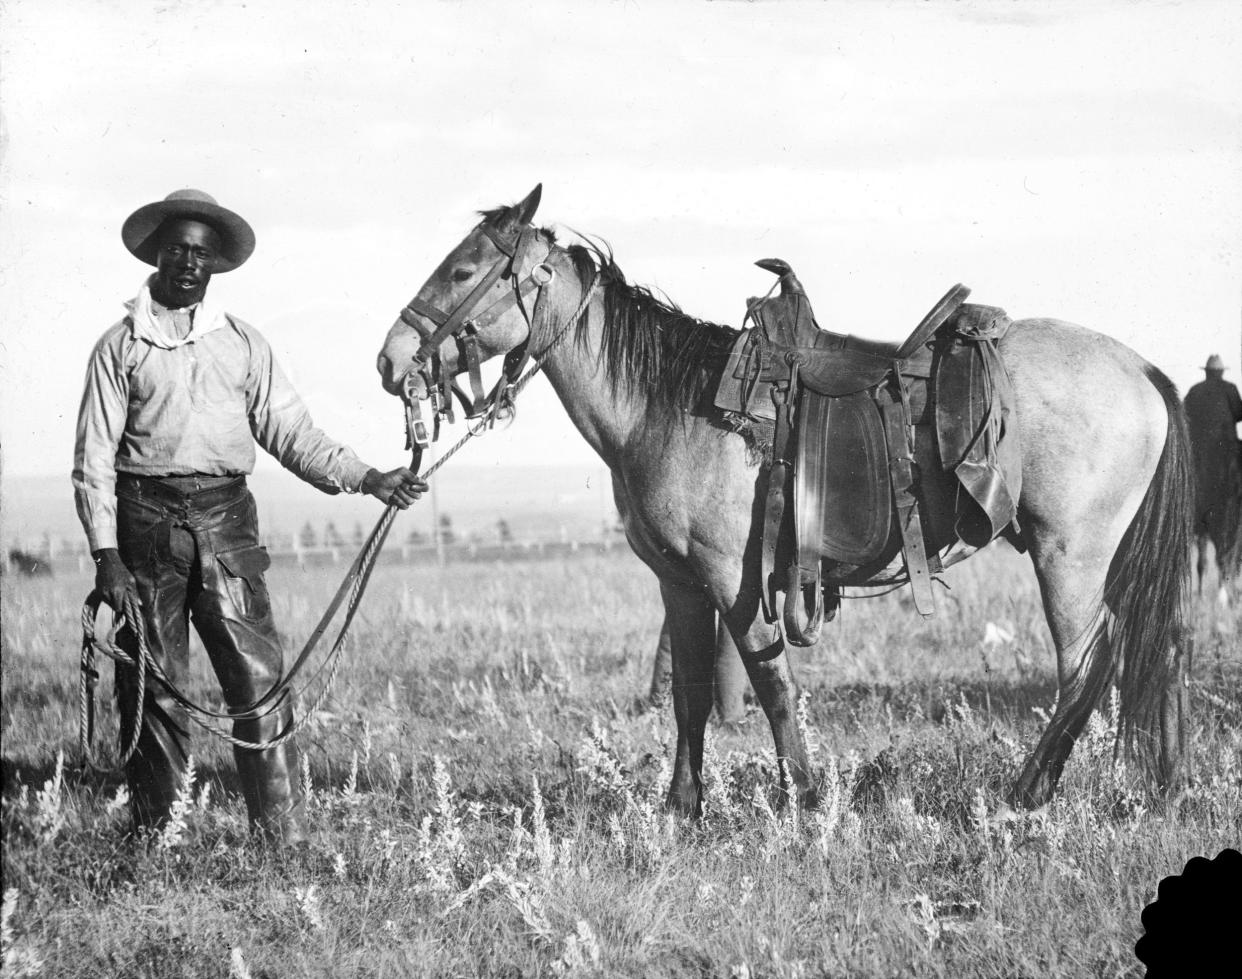 “Cowboy & Horse” is featured in the exhibit "Black Cowboys: An American Story," on view through Jan. 2 at the National Cowboy & Western Heritage Museum.